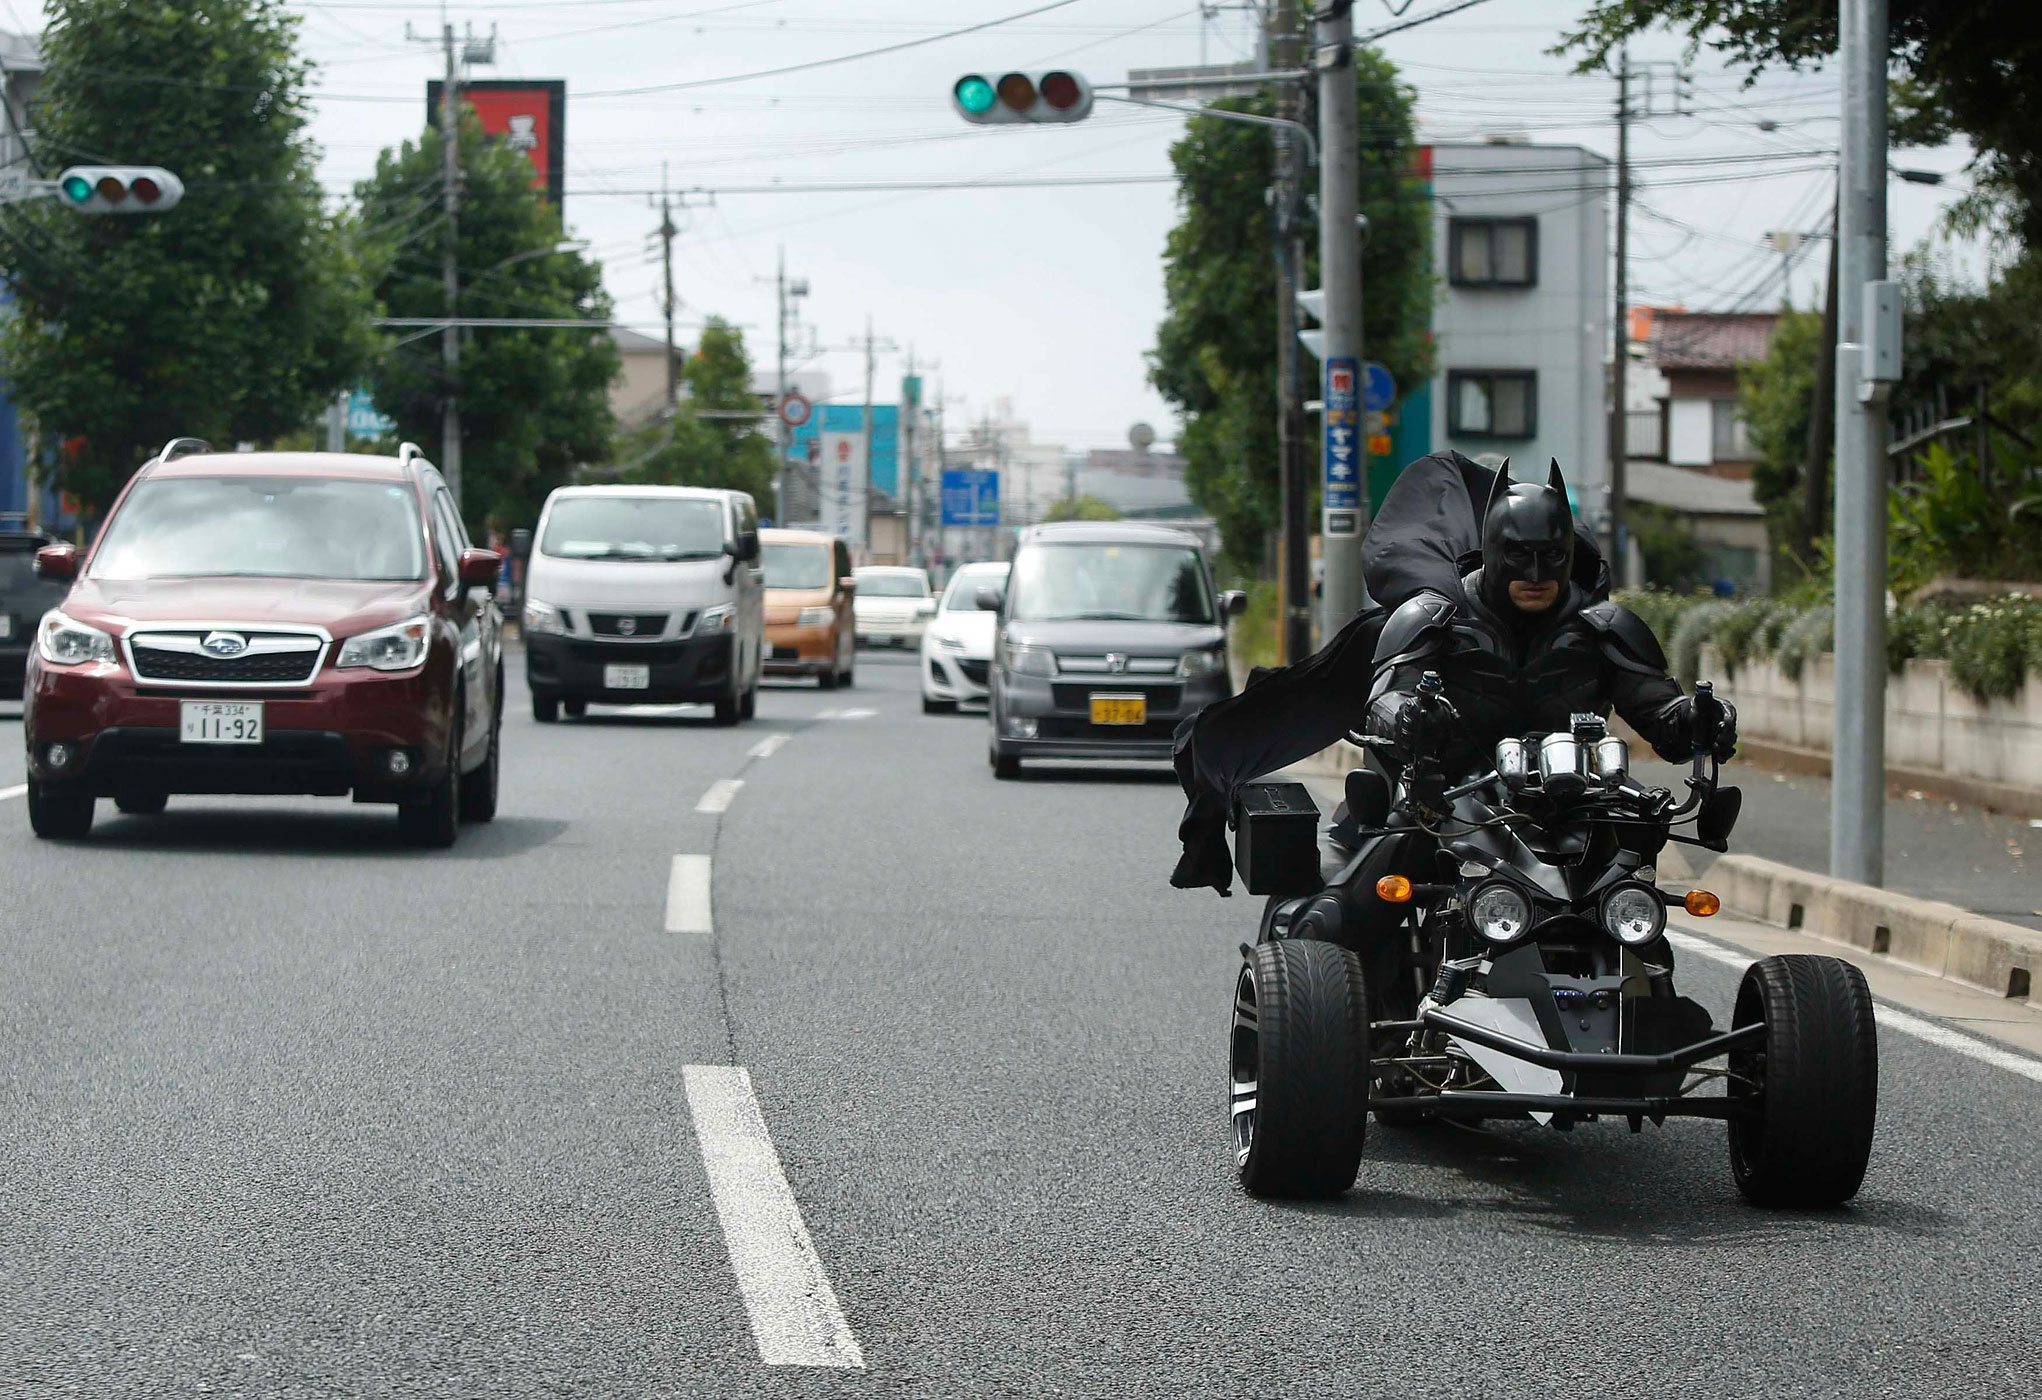 A 41-year-old man going by the name of Chibatman rides his "Chibatpod" on the road in Chiba, east of Tokyo